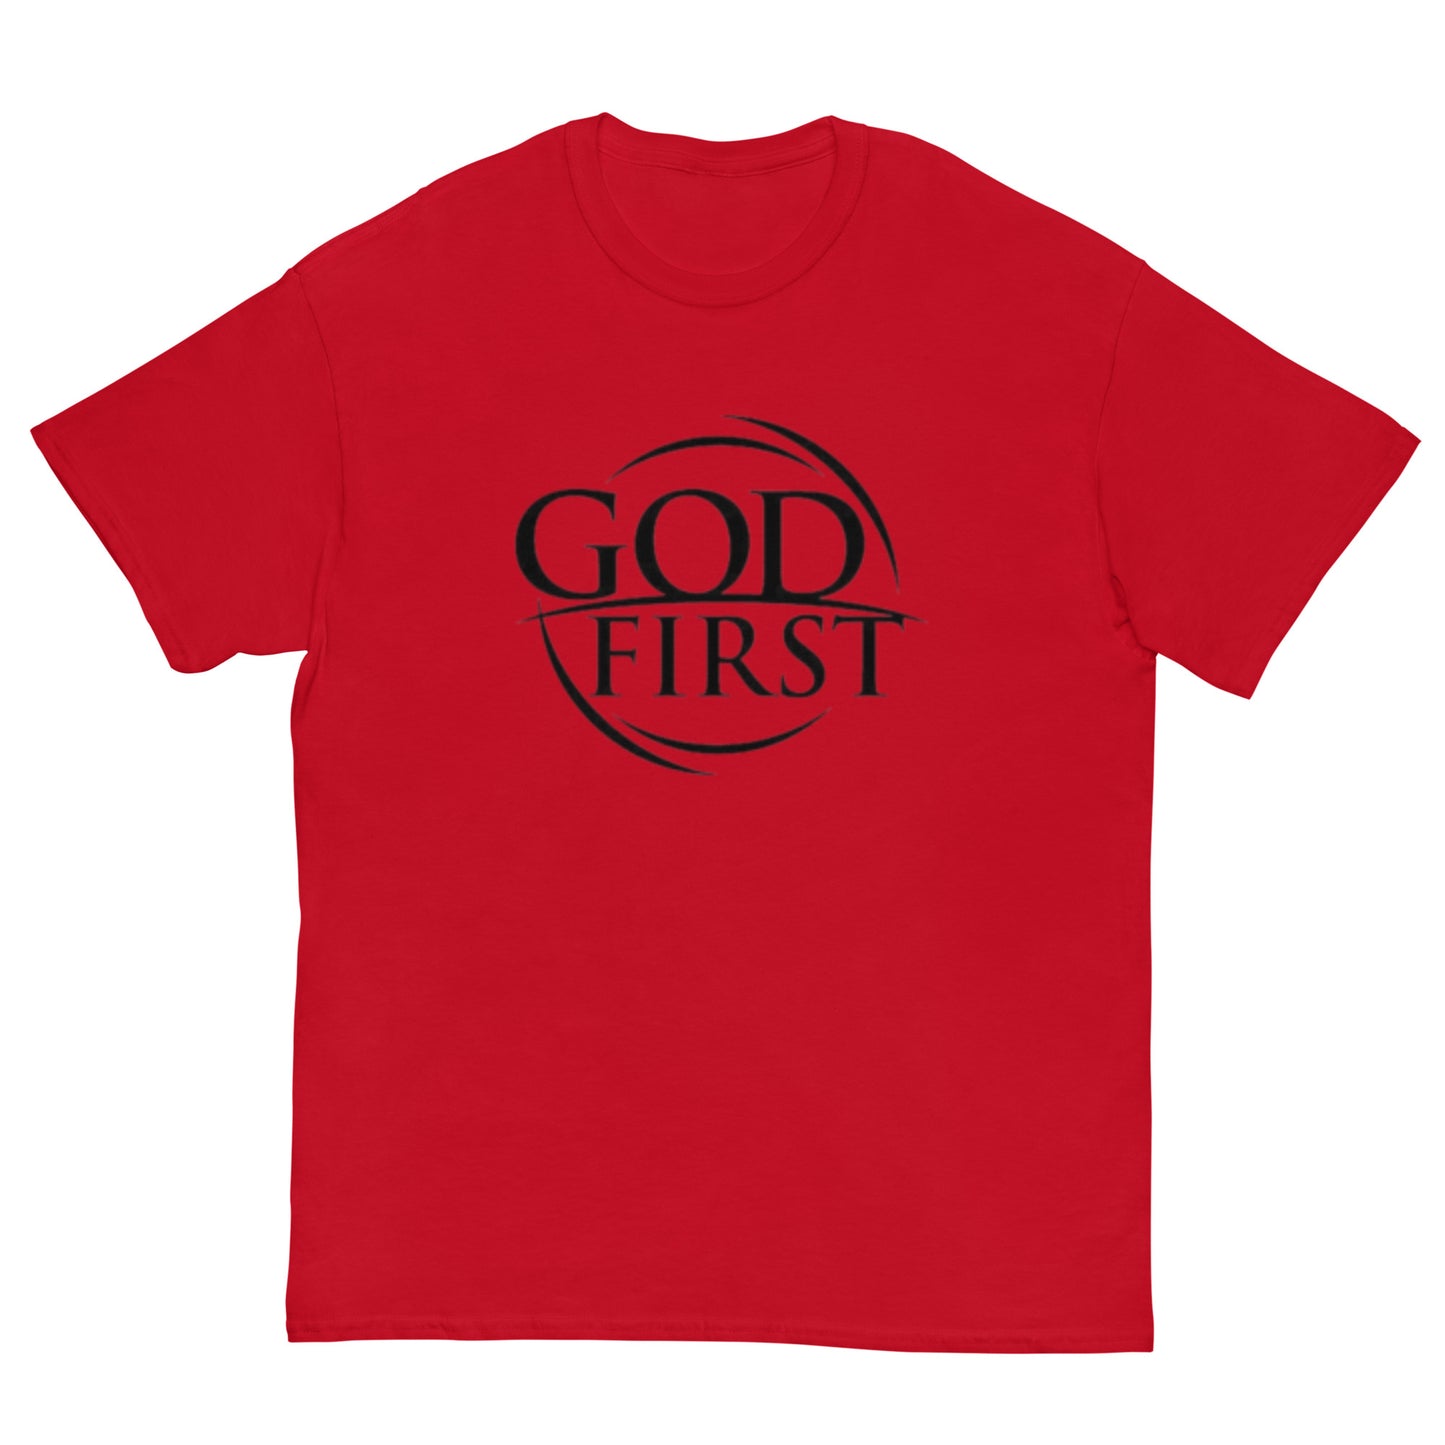 God First - classic tee